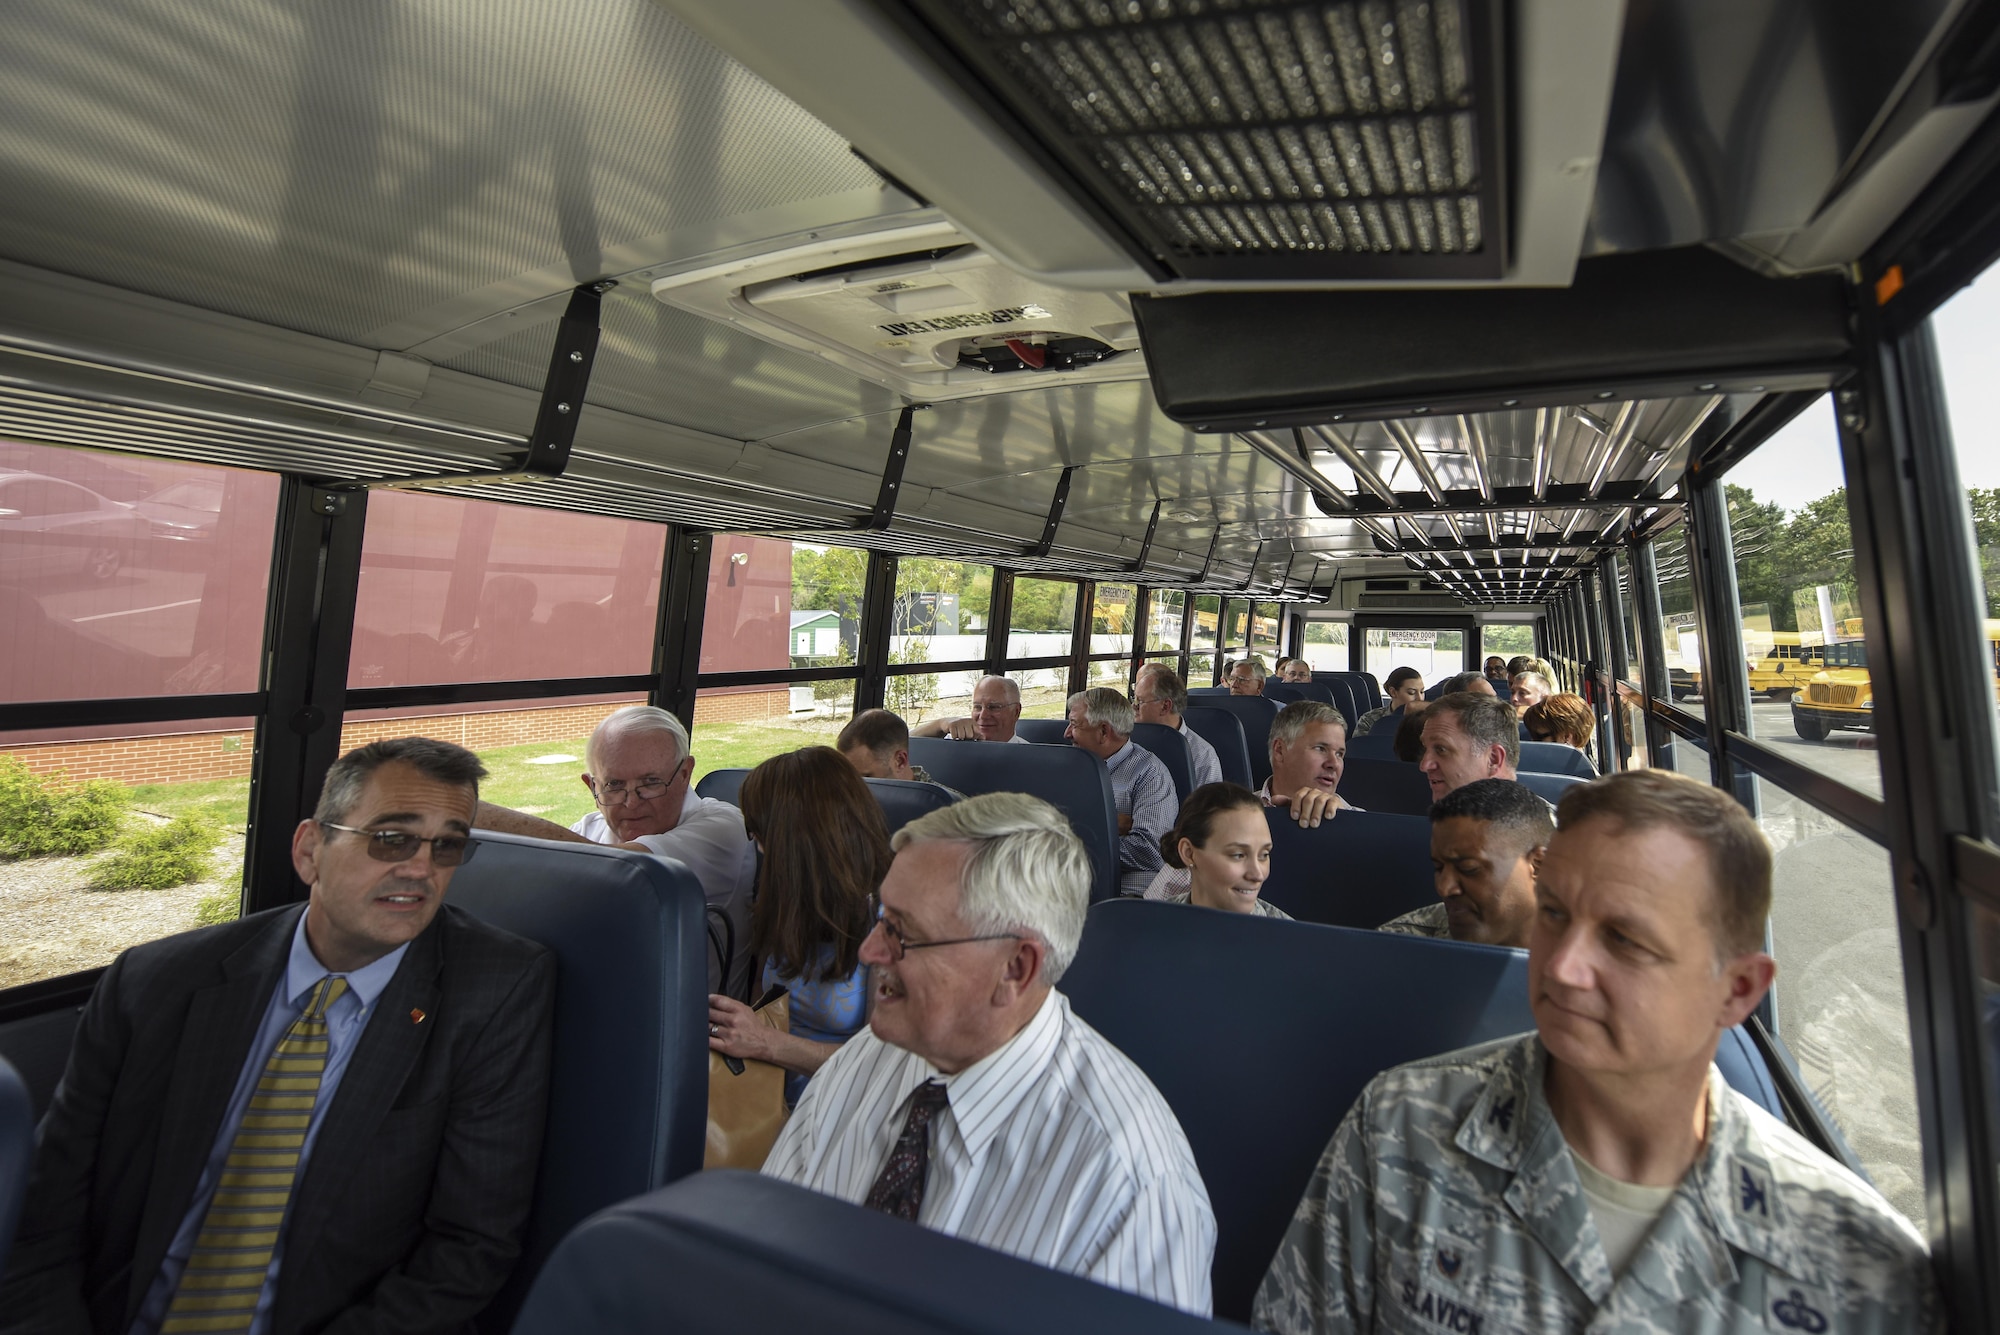 A number of 4th Fighter Wing and community leaders ride in a Wayne County School bus during their tour of three different county schools, May 11, 2016, in Goldsboro, North Carolina. Members received transportation in both an old and newer model school bus to experience the ride Wayne County School children take to and from school every day. (U.S. Air Force photo by Airman Shawna L. Keyes)